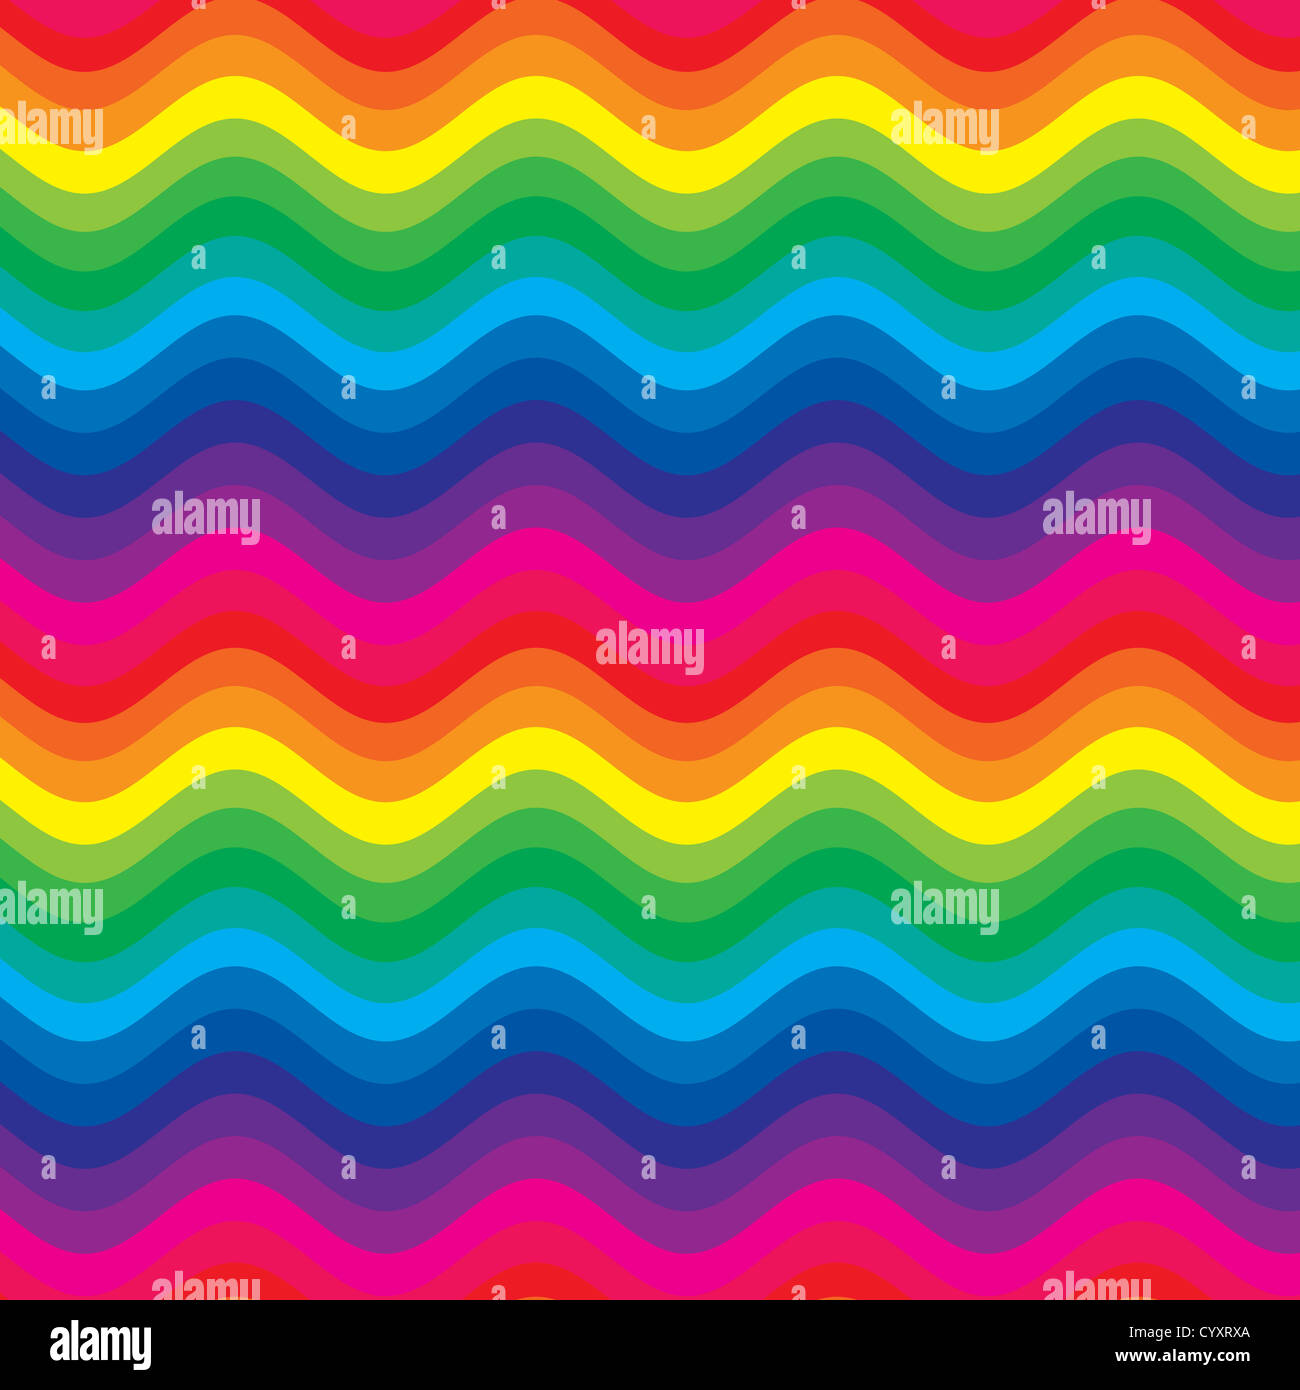 Computer generated colorful rainbow waves Stock Photo